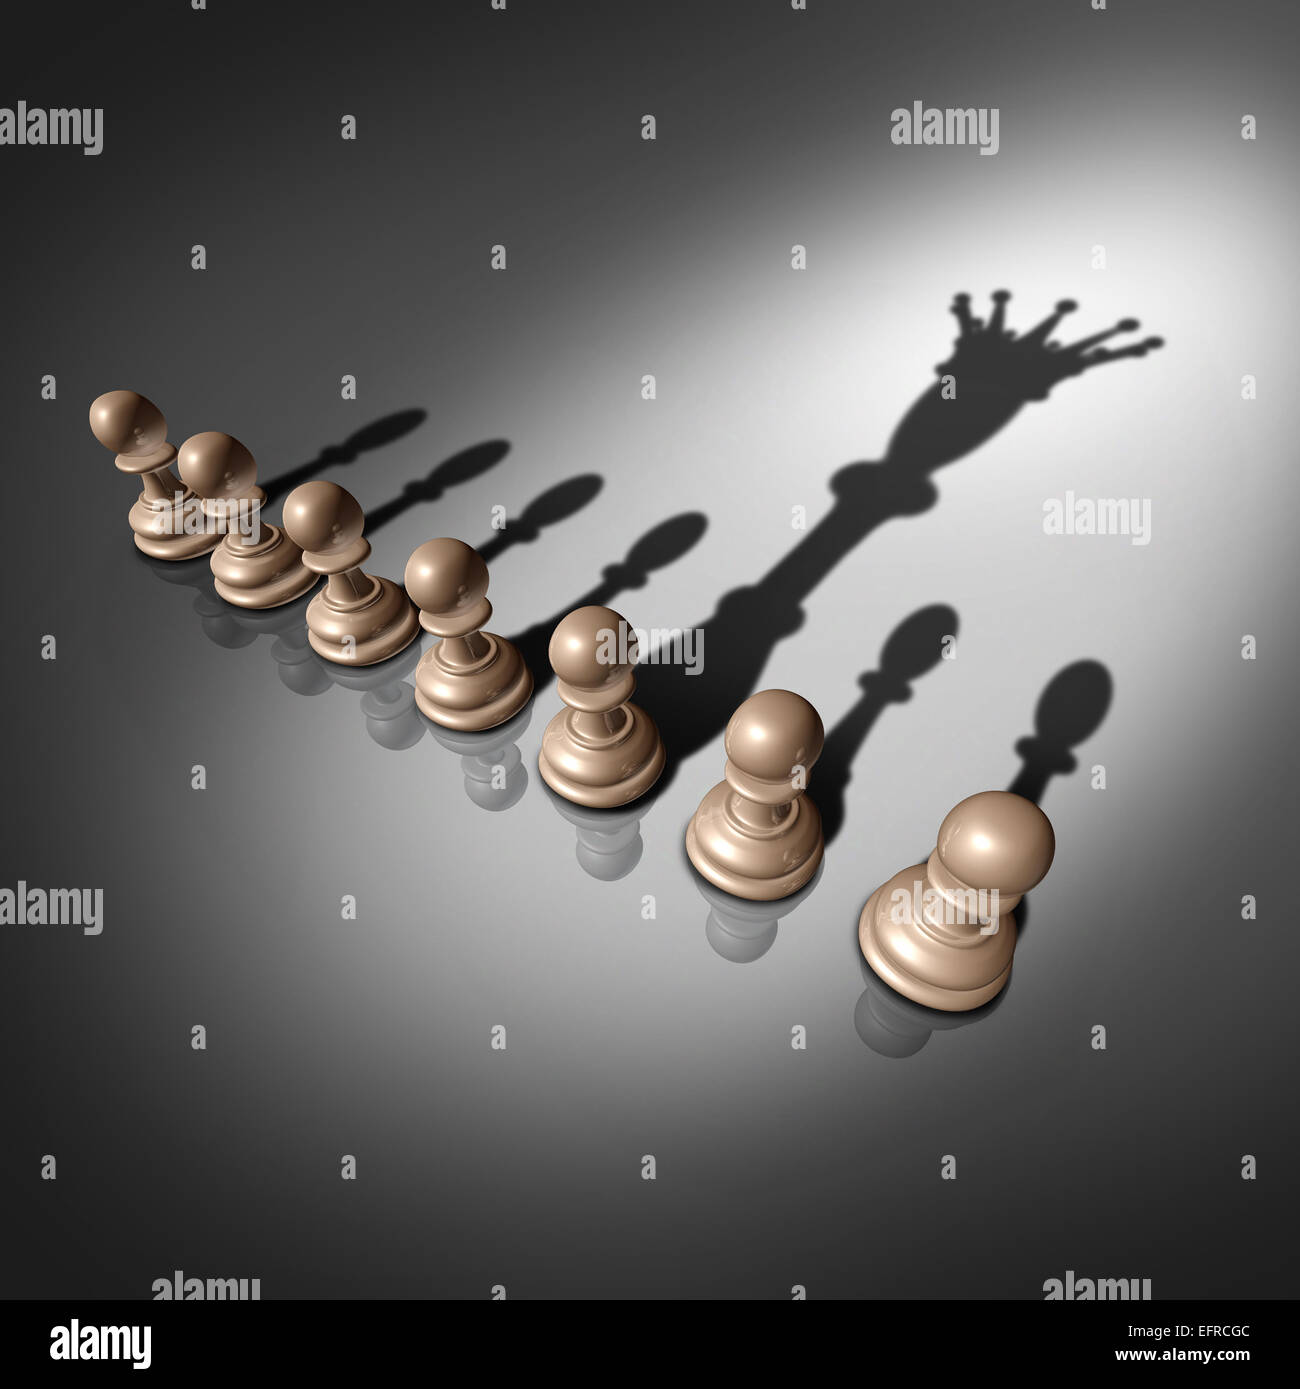 Leadership search and business recruitment concept as a group of pawn chess pieces and one individual standing out with a king crown cast shadow as a metaphor for the chosen one. Stock Photo